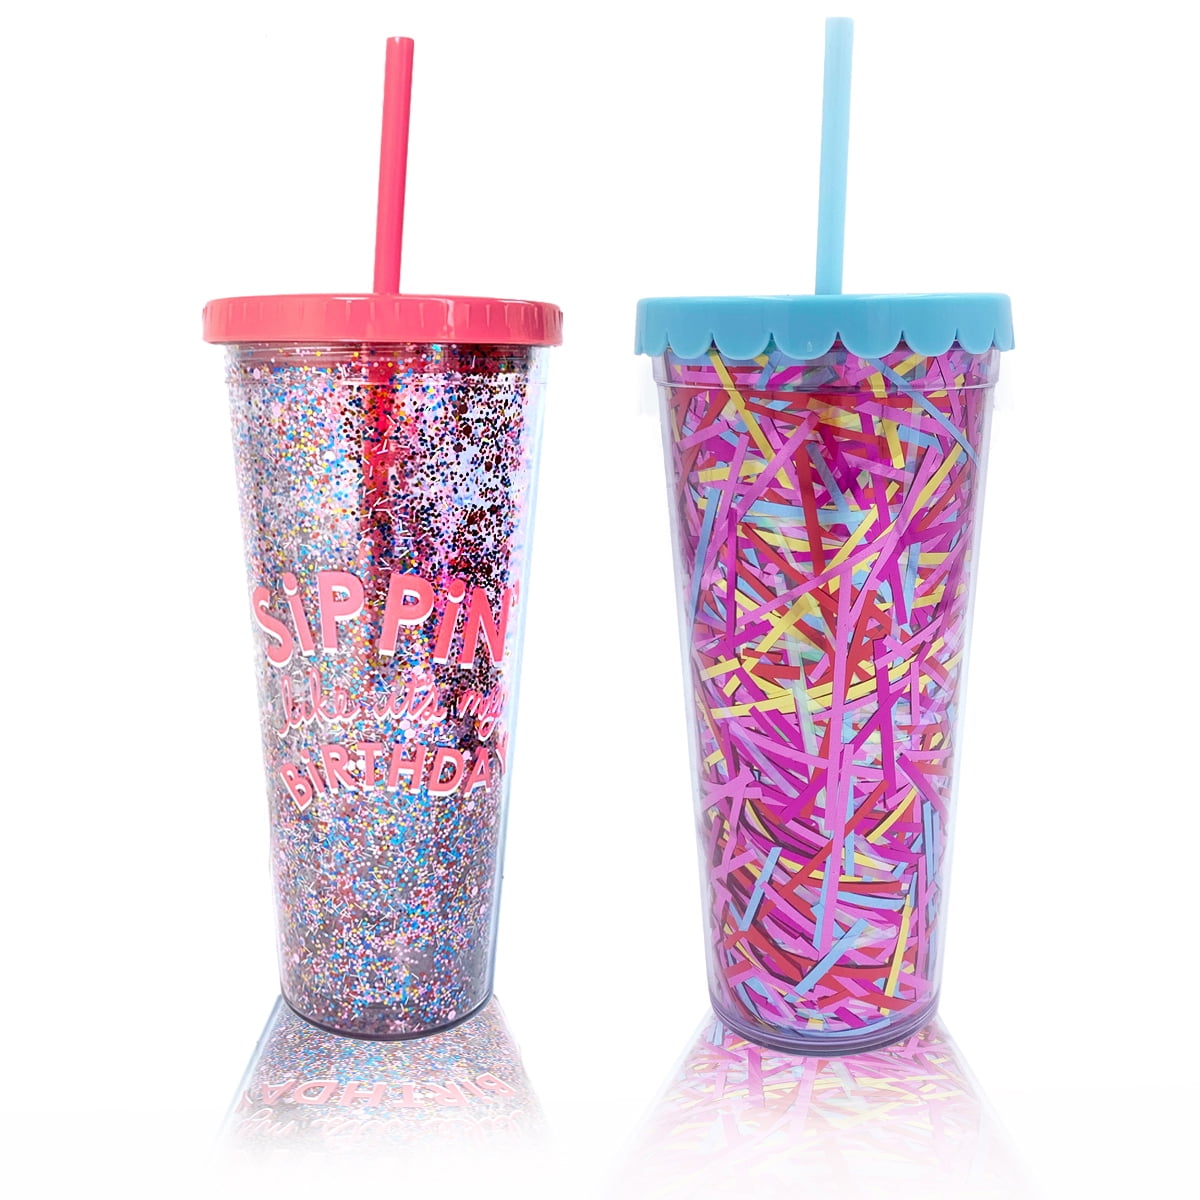 AGH 4 Pack Sublimation Tumblers 16oz Glass Straight Skinny Tumbler, Frosted Glass Cups Mason Jar Mug with Splash-proof Lid and Straw, Reusable